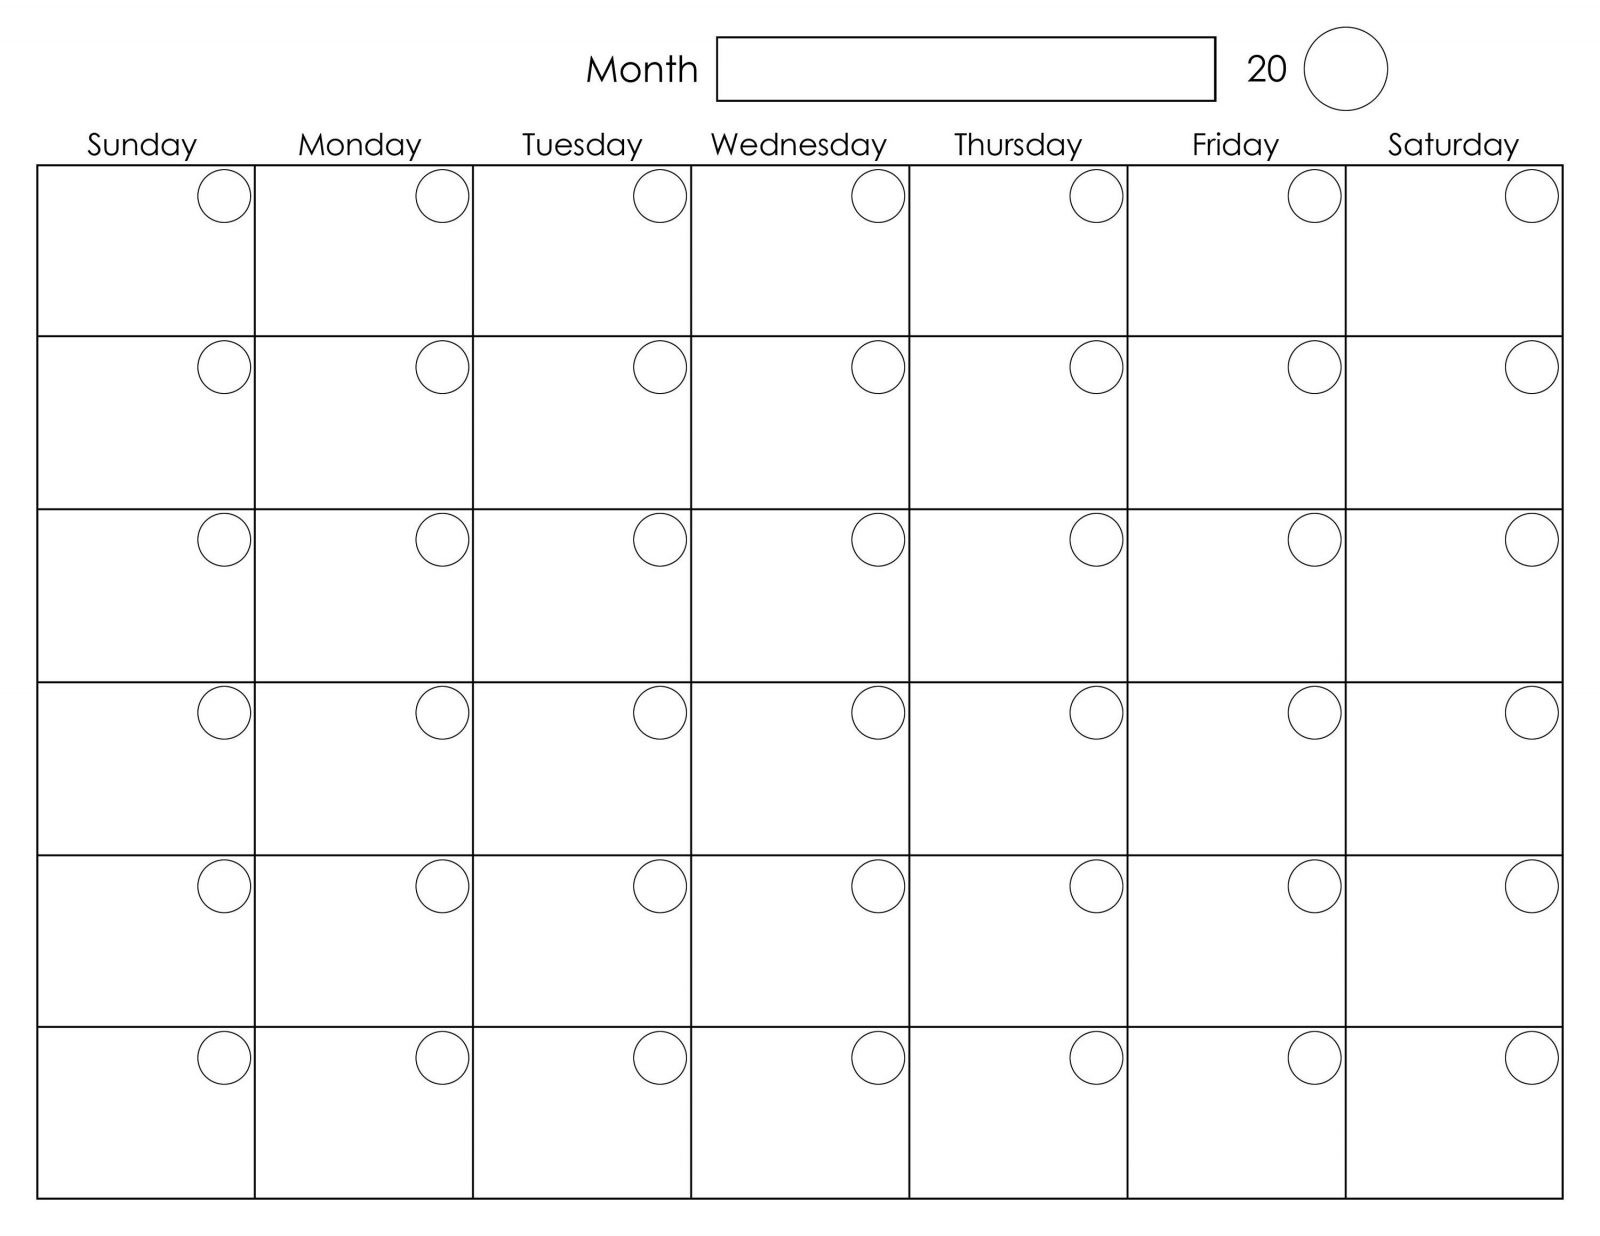 Blank Monthly Planner Starts On Monday | Calendar Template ...